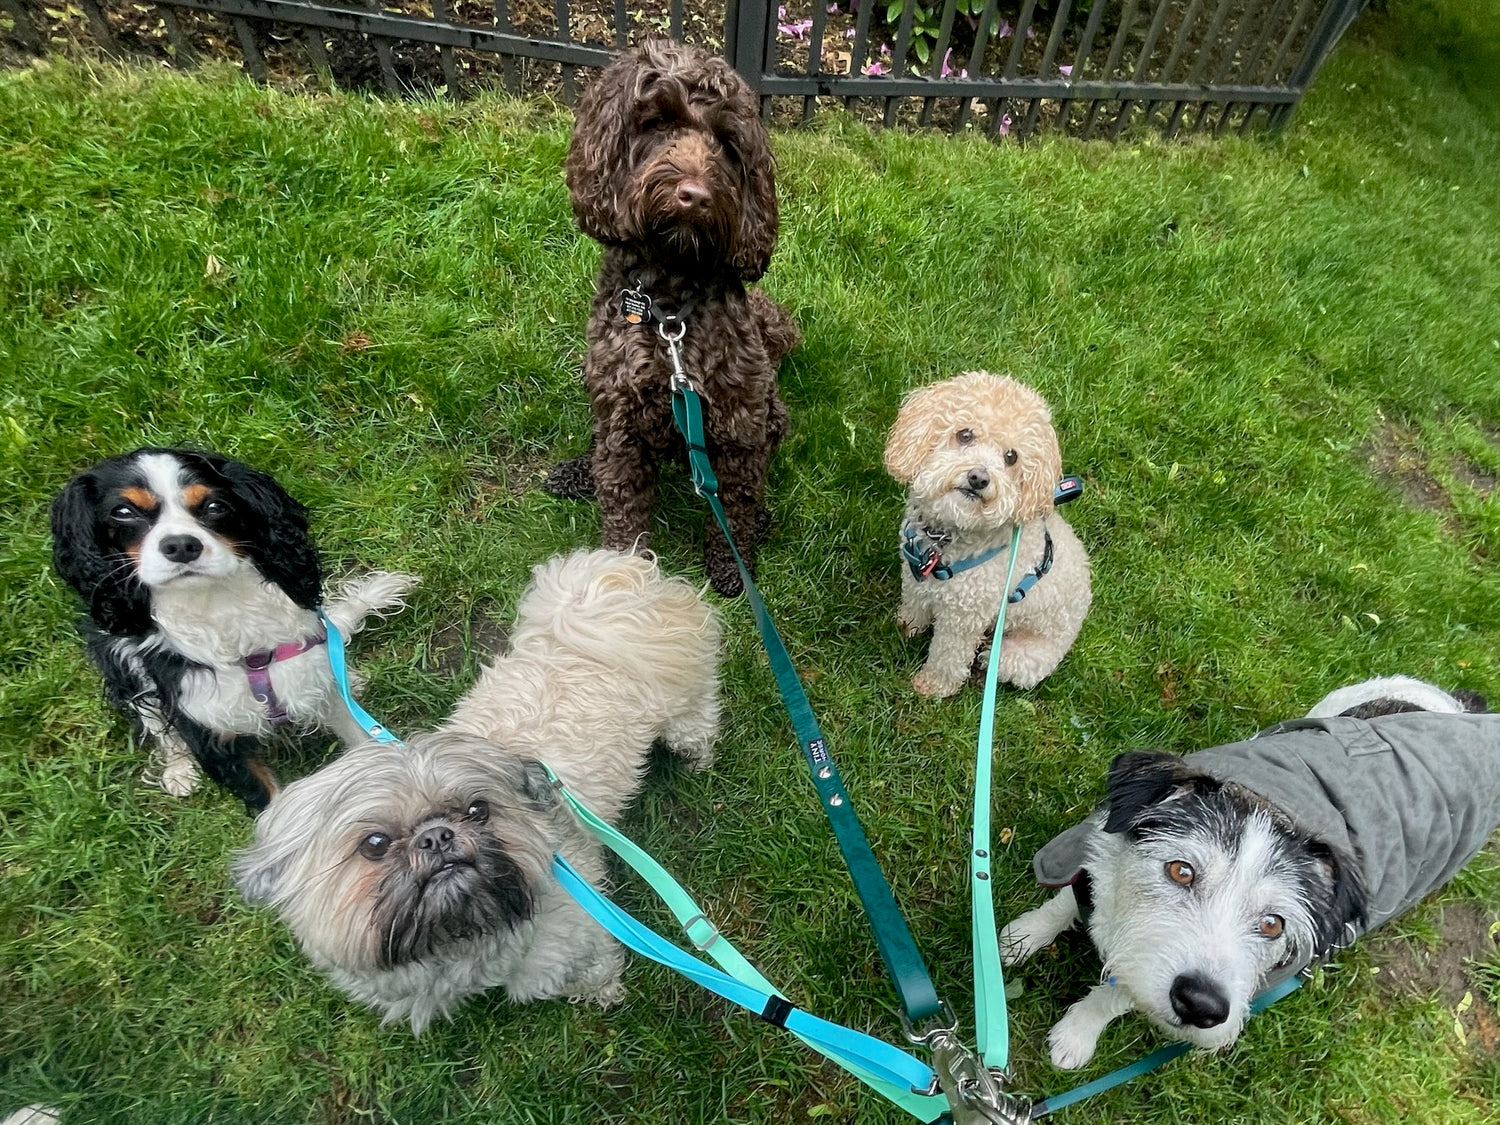 5 small to medium dogs leashed to colourful green and blue TinyHorse leashes. There’s a King Charles Spaniel, a brown doodle, a miniature poodle, a Pekingese mix and a small terrier mix.